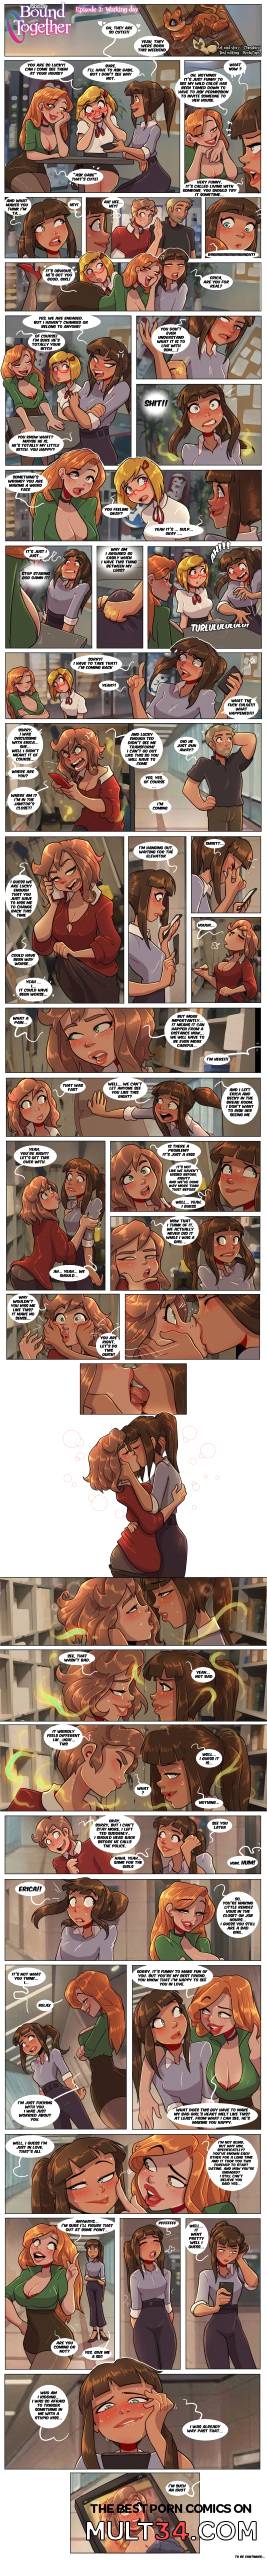 Bound Together page 4